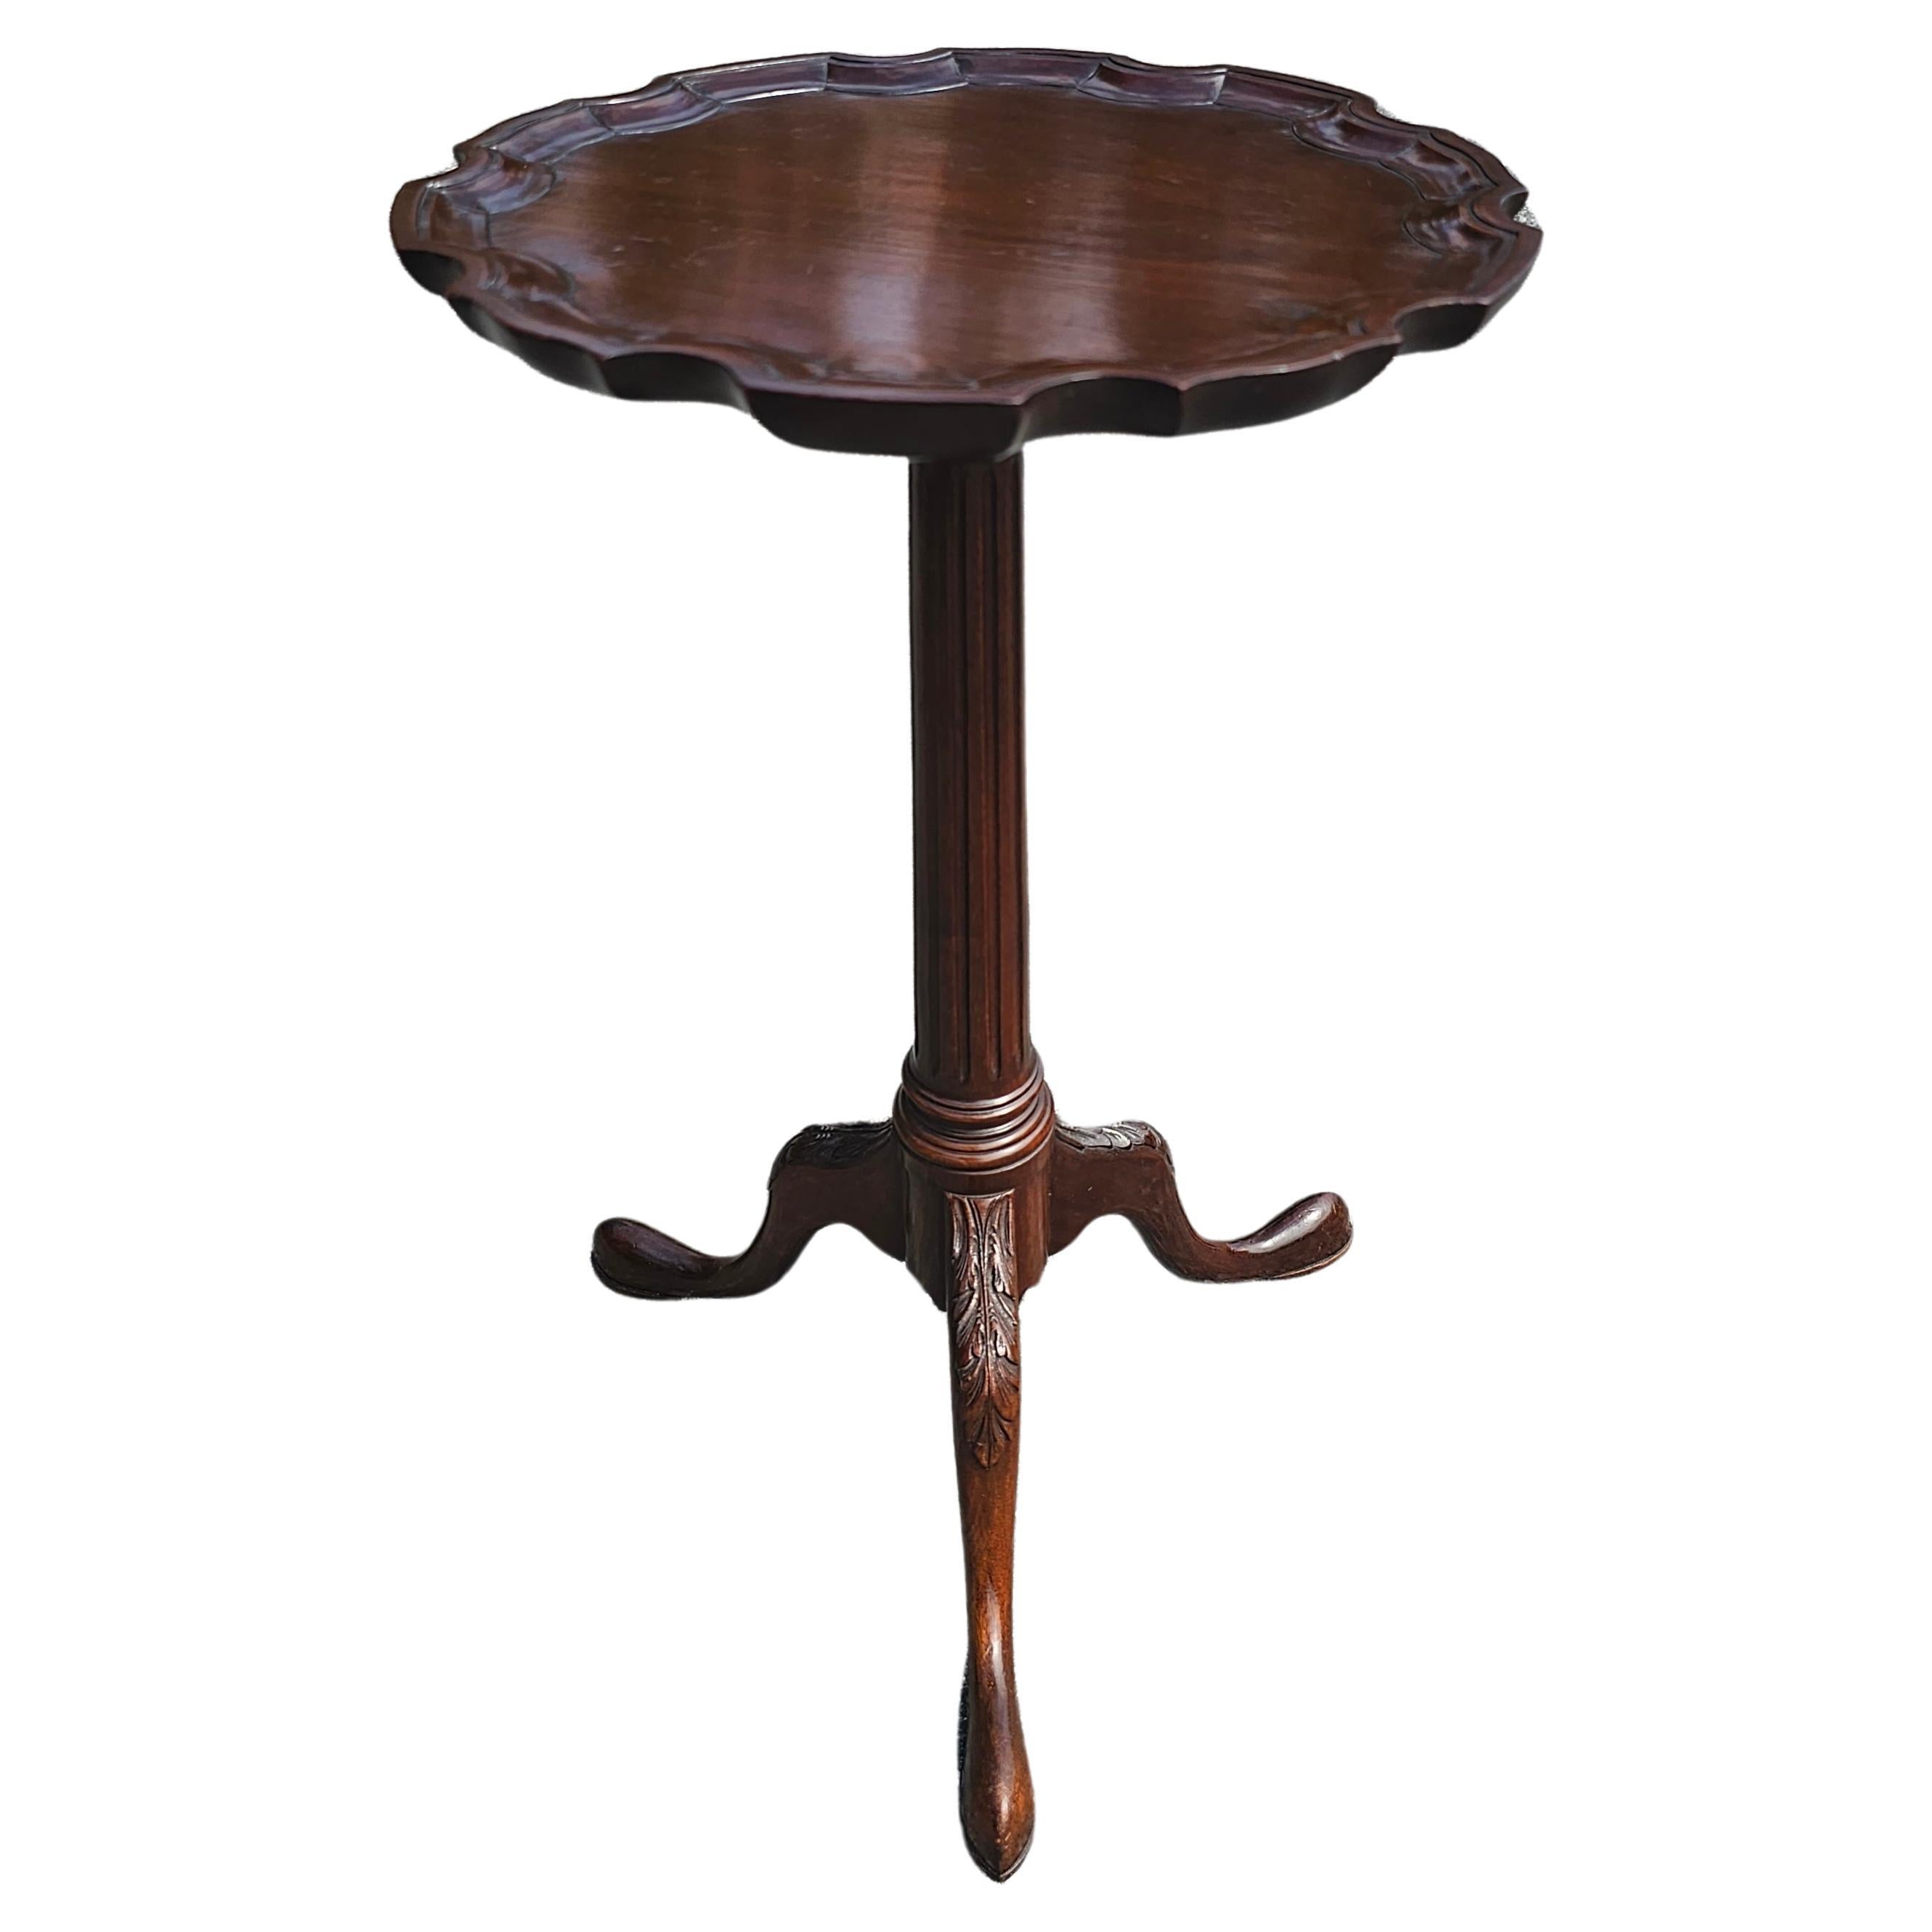 Early 20th Century George III Style Mahogany Galleried Refinished Candle Stand For Sale